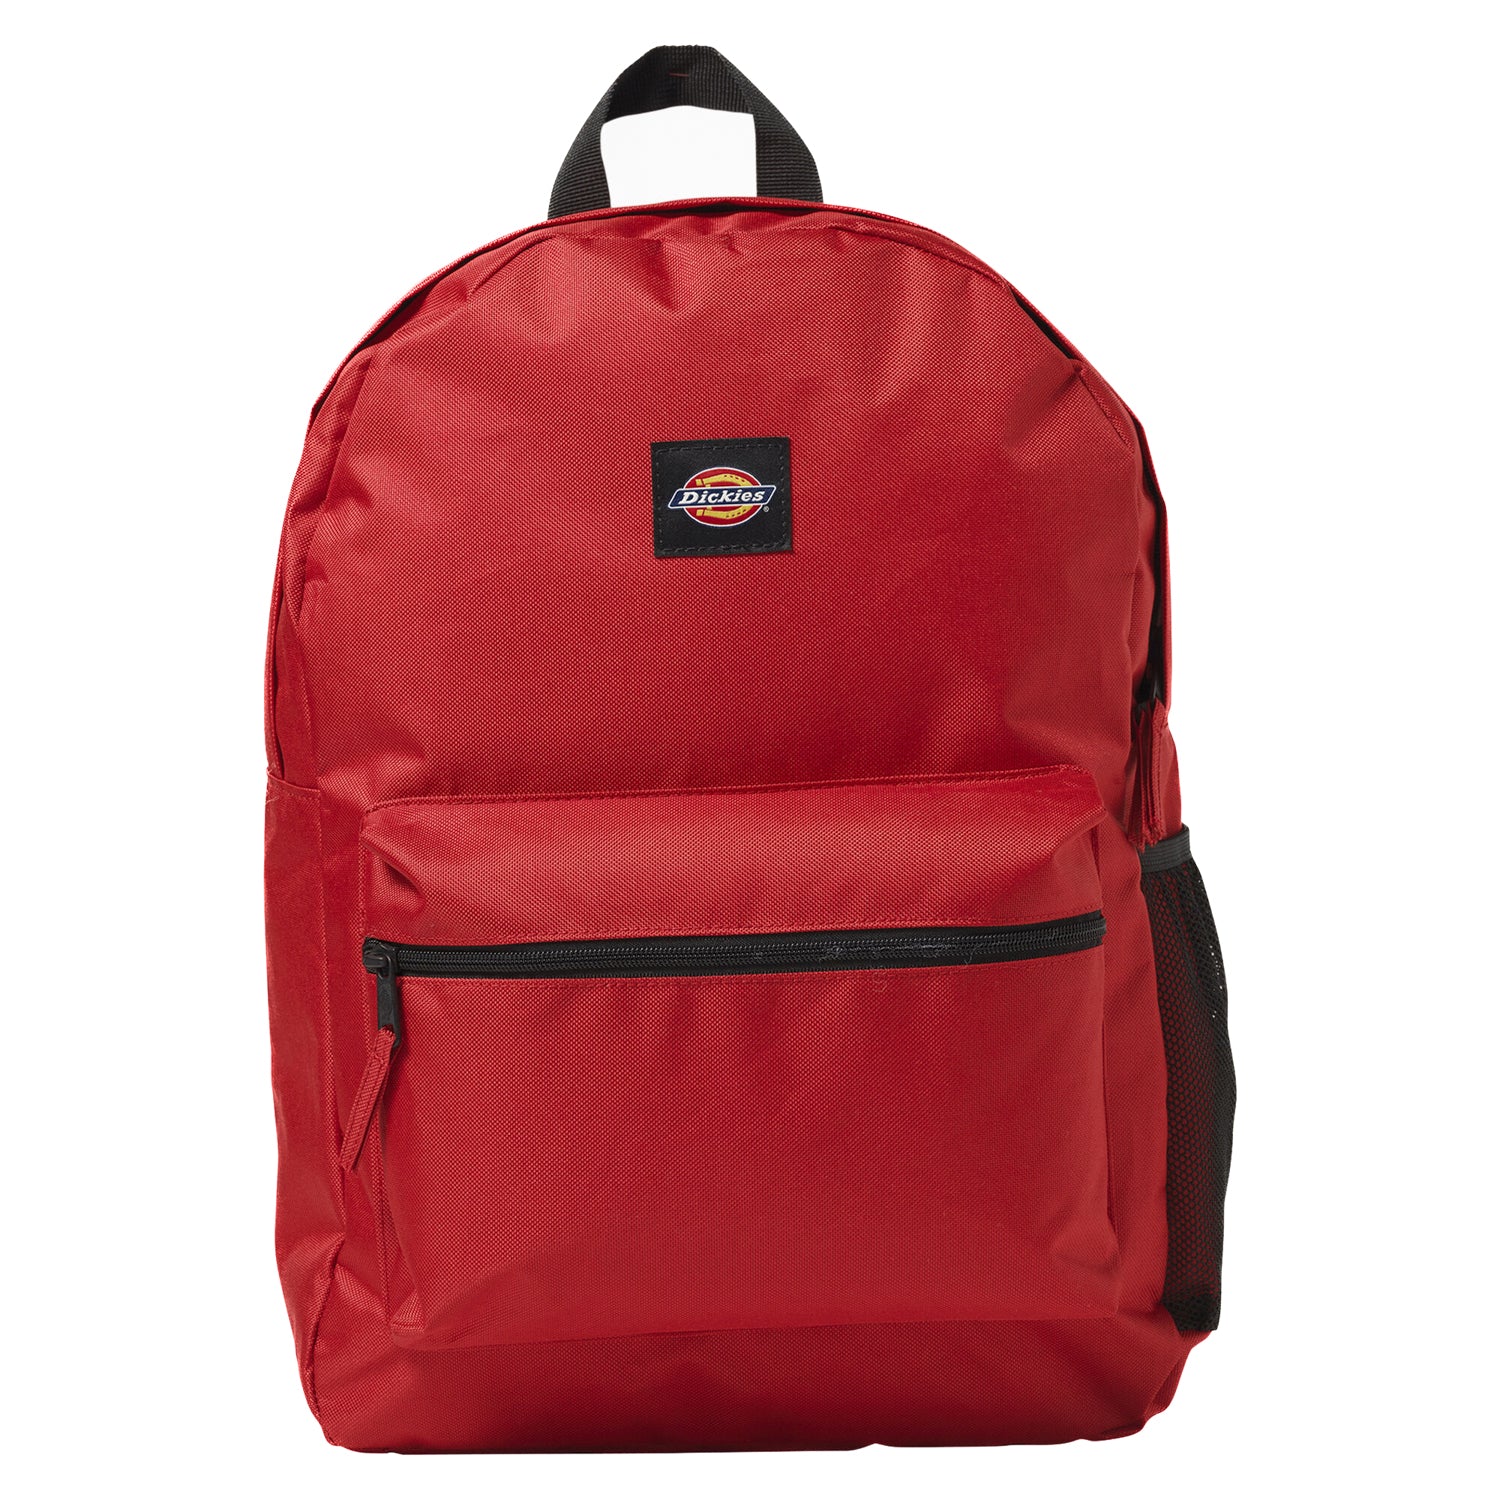 Woven Basic Backpack - English Red